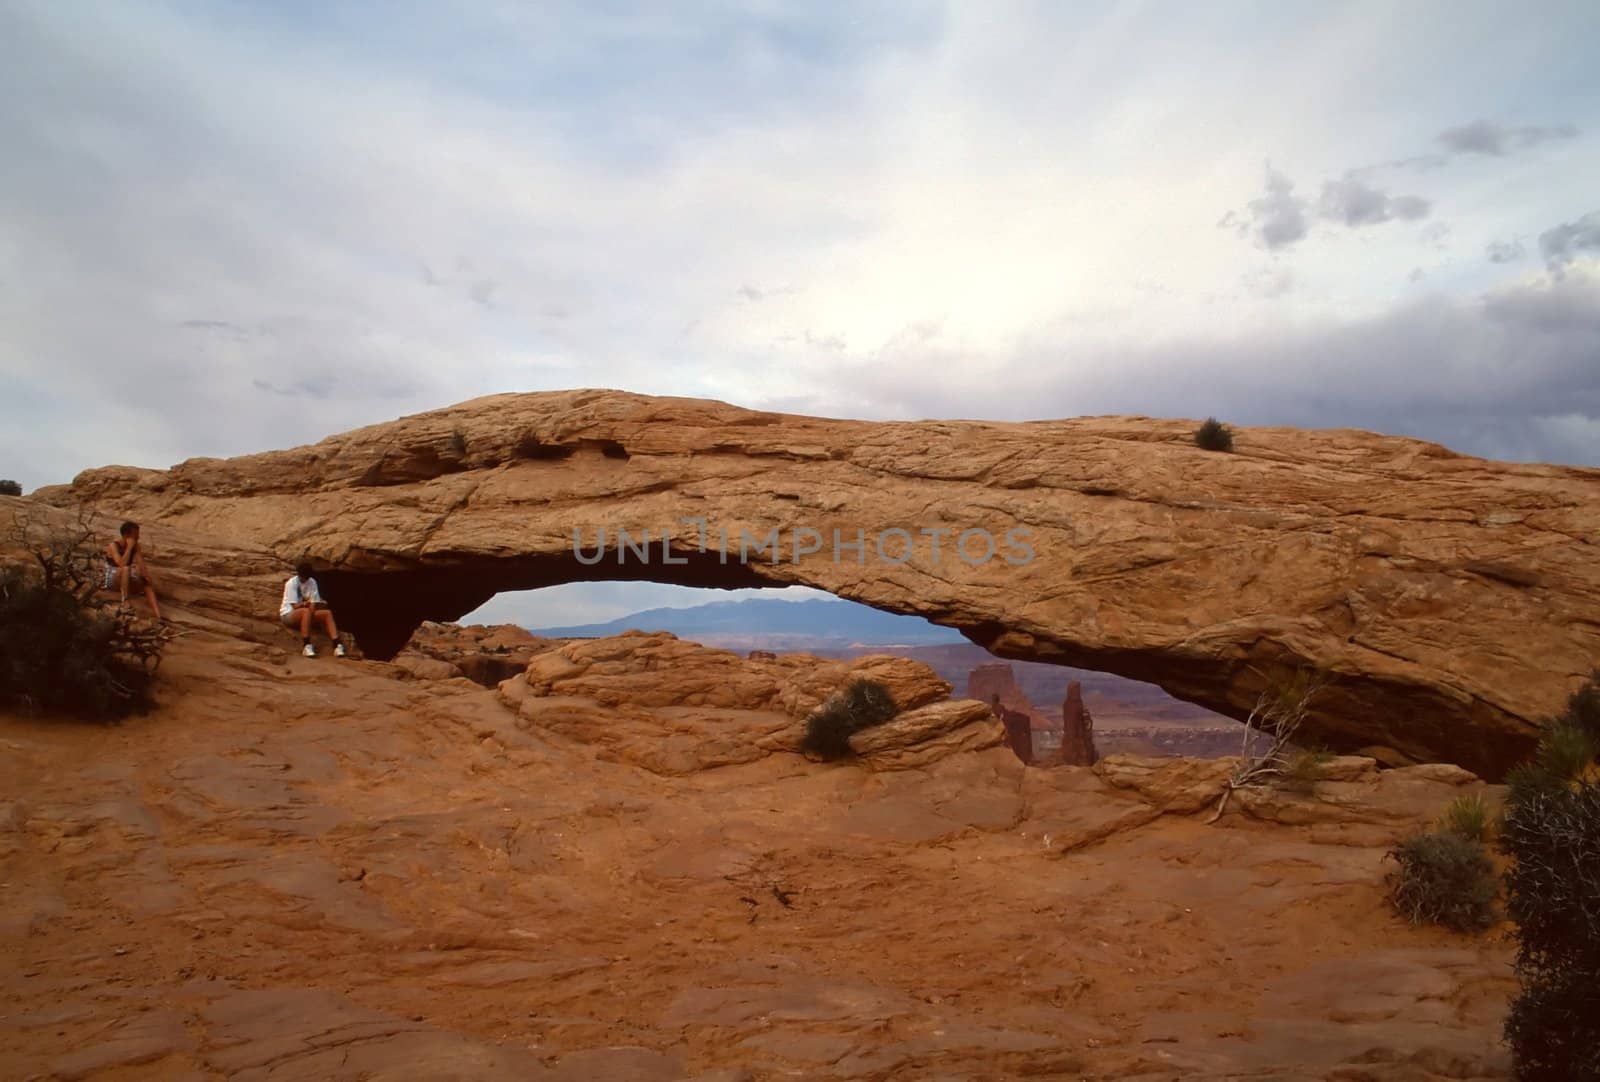 Canyonlands National Park, located near Moab, Utah and Arches National Park